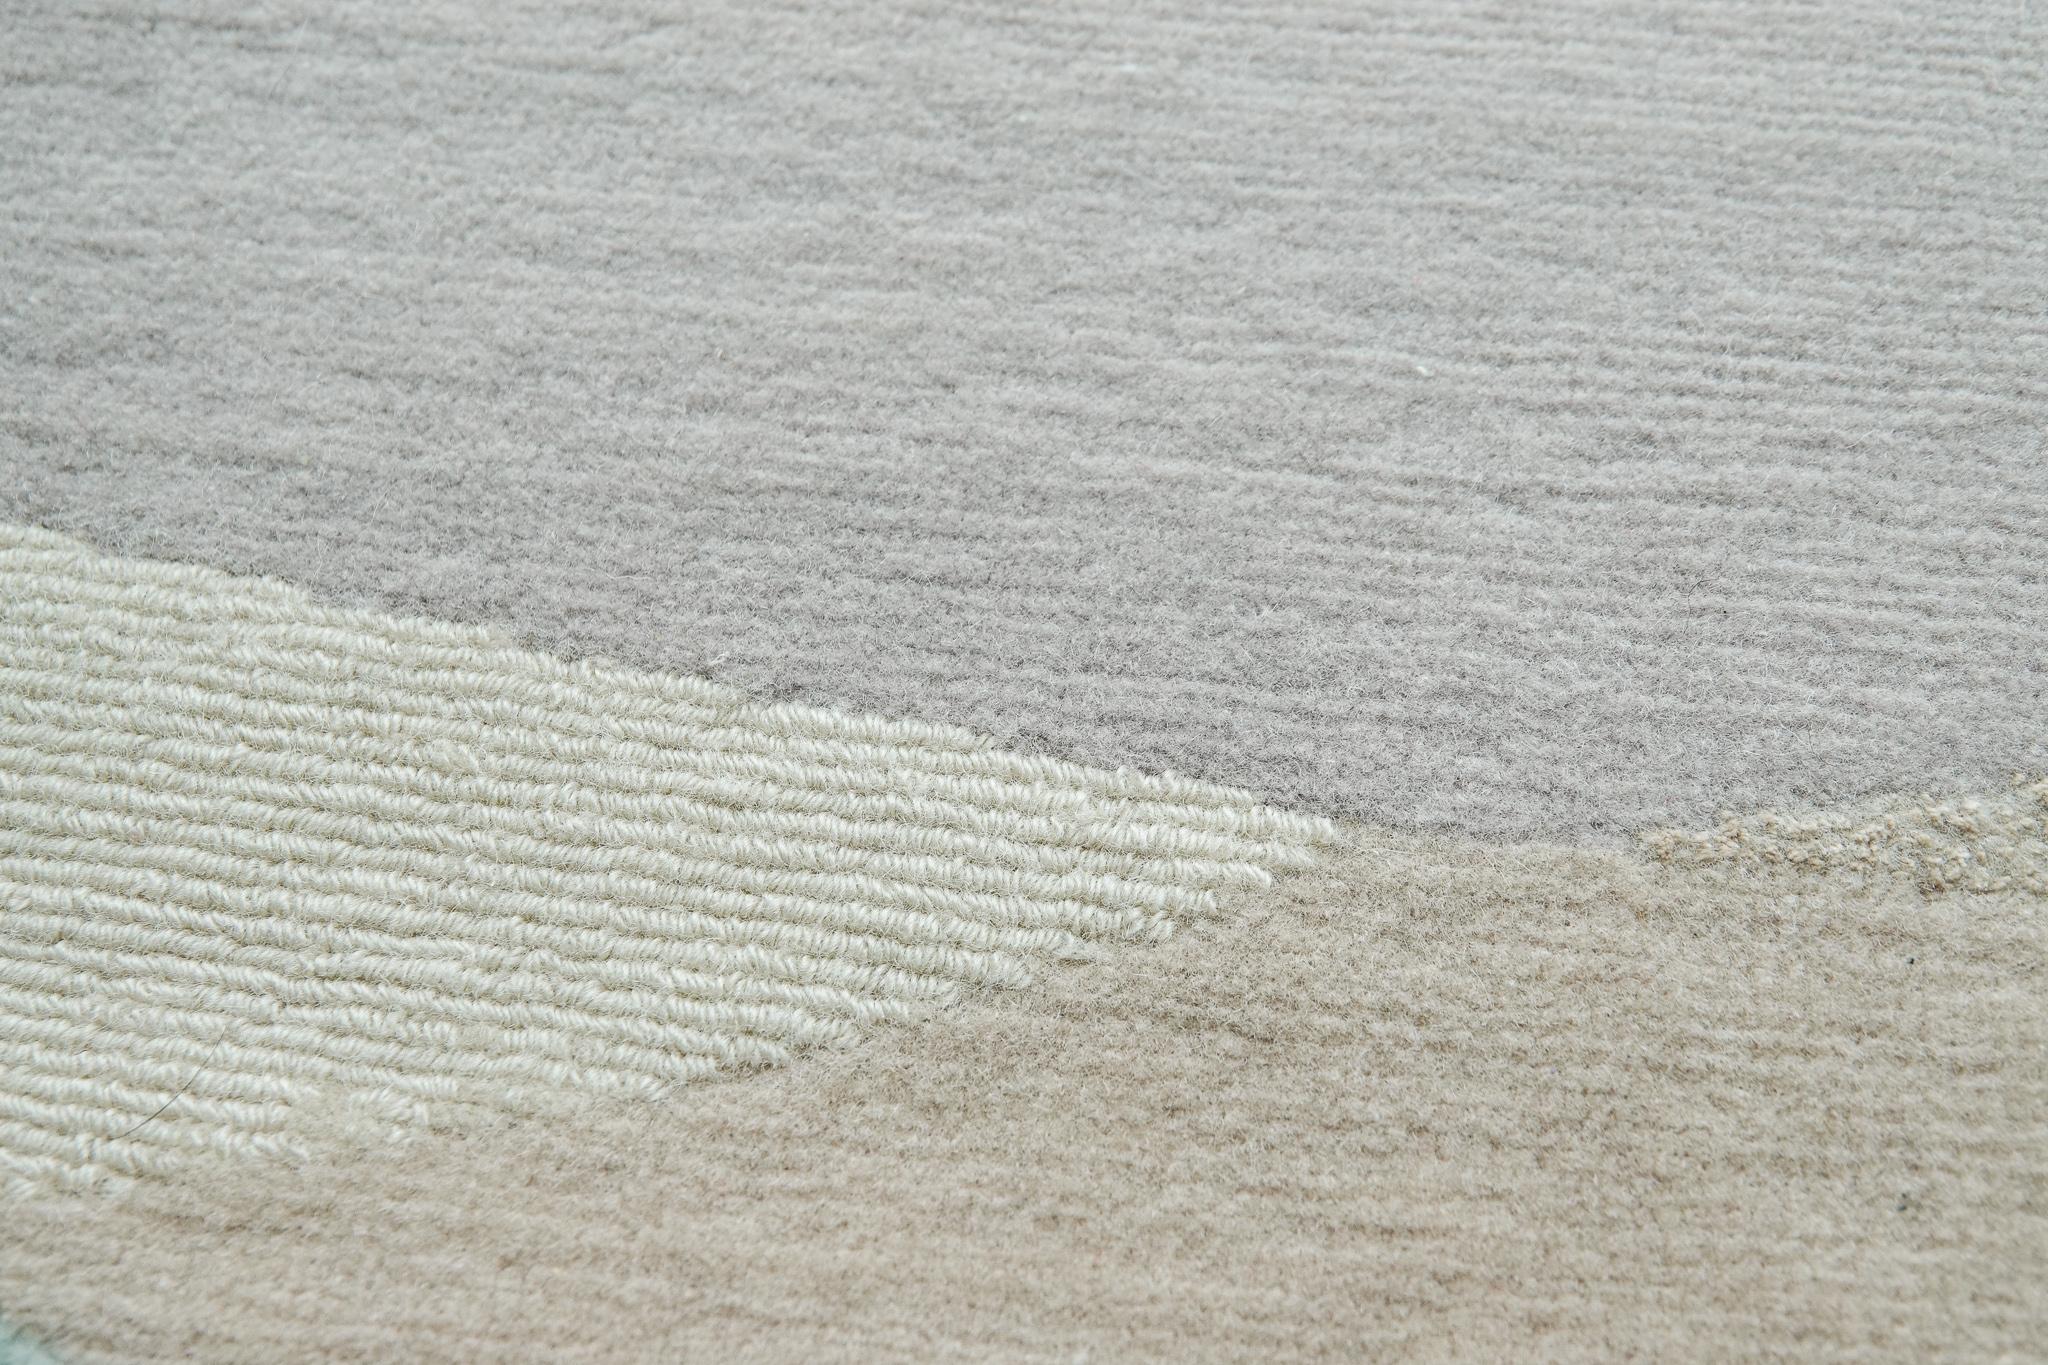 Rug design as a symphony of color

Democratic rug for spaces with elements of light, warm woods and natural light. The rug is composed of free-form and free-sized figures, which complement each other.  Delicate pastel colors are combined with dusty